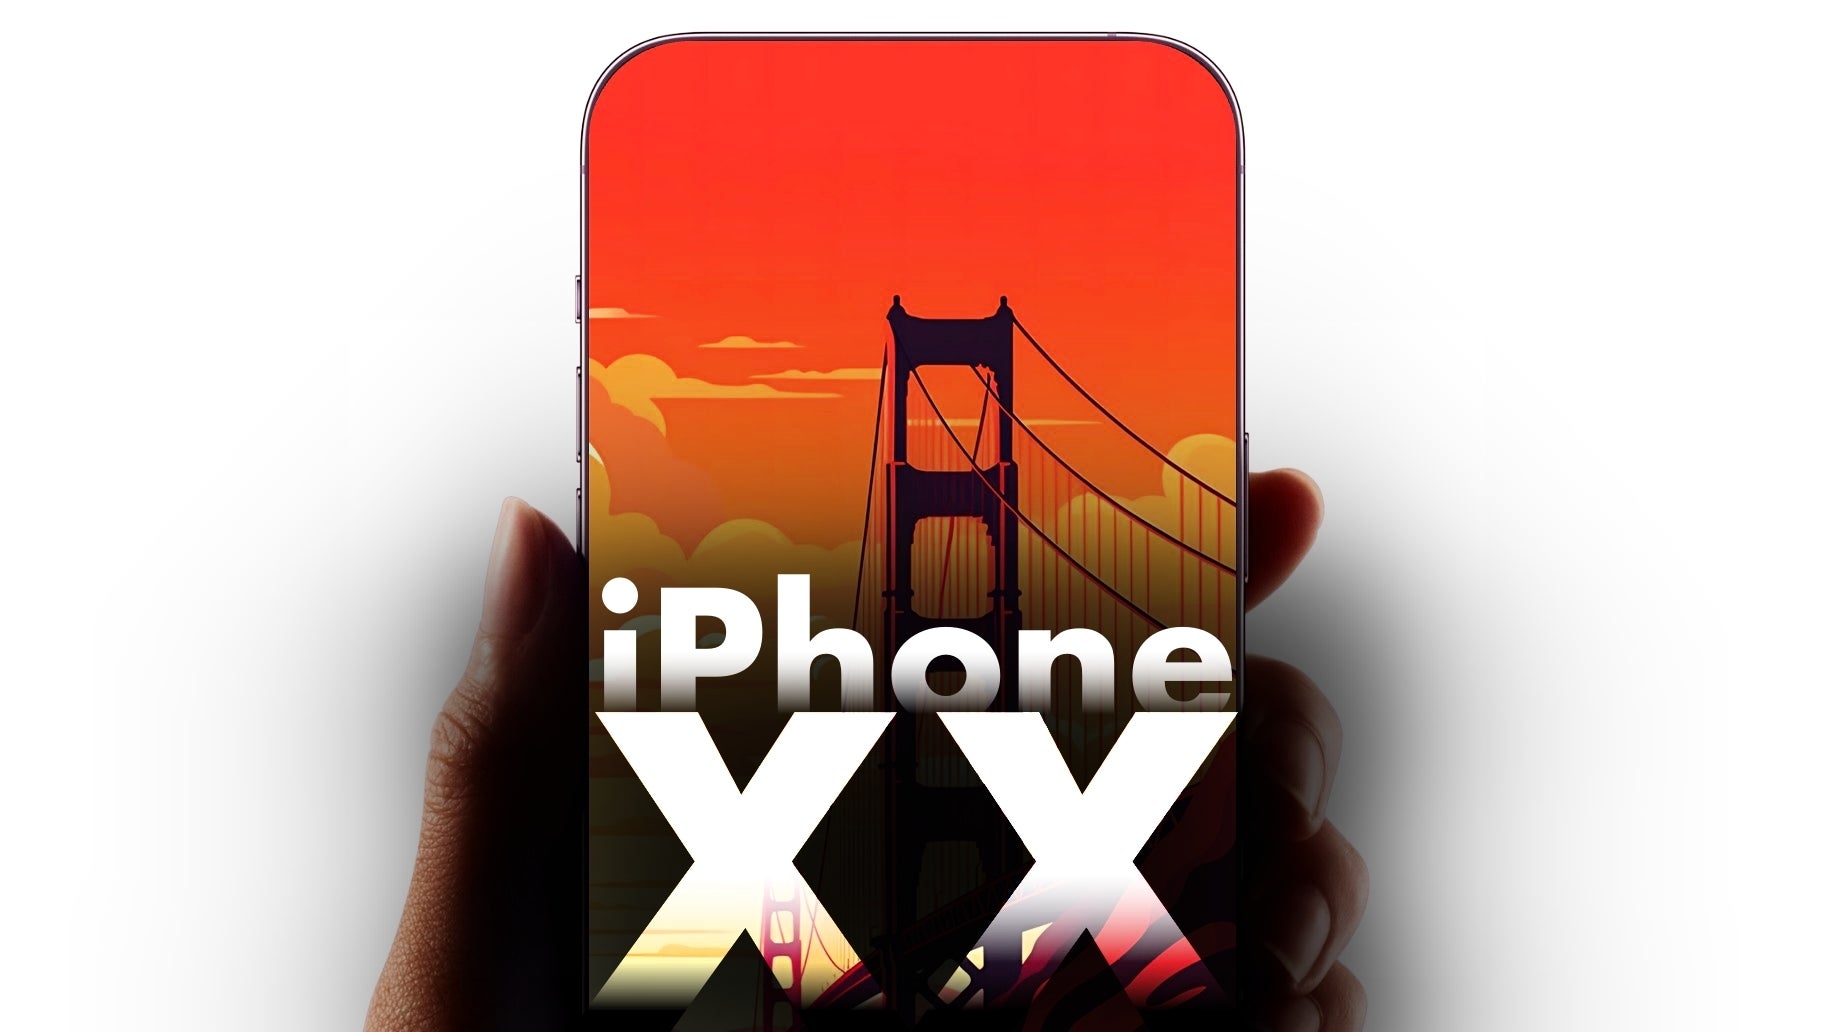 Apple's iPhone XX plan: Unbreakable, all-screen glass box iPhone and Tim Cook's One Last Thing?